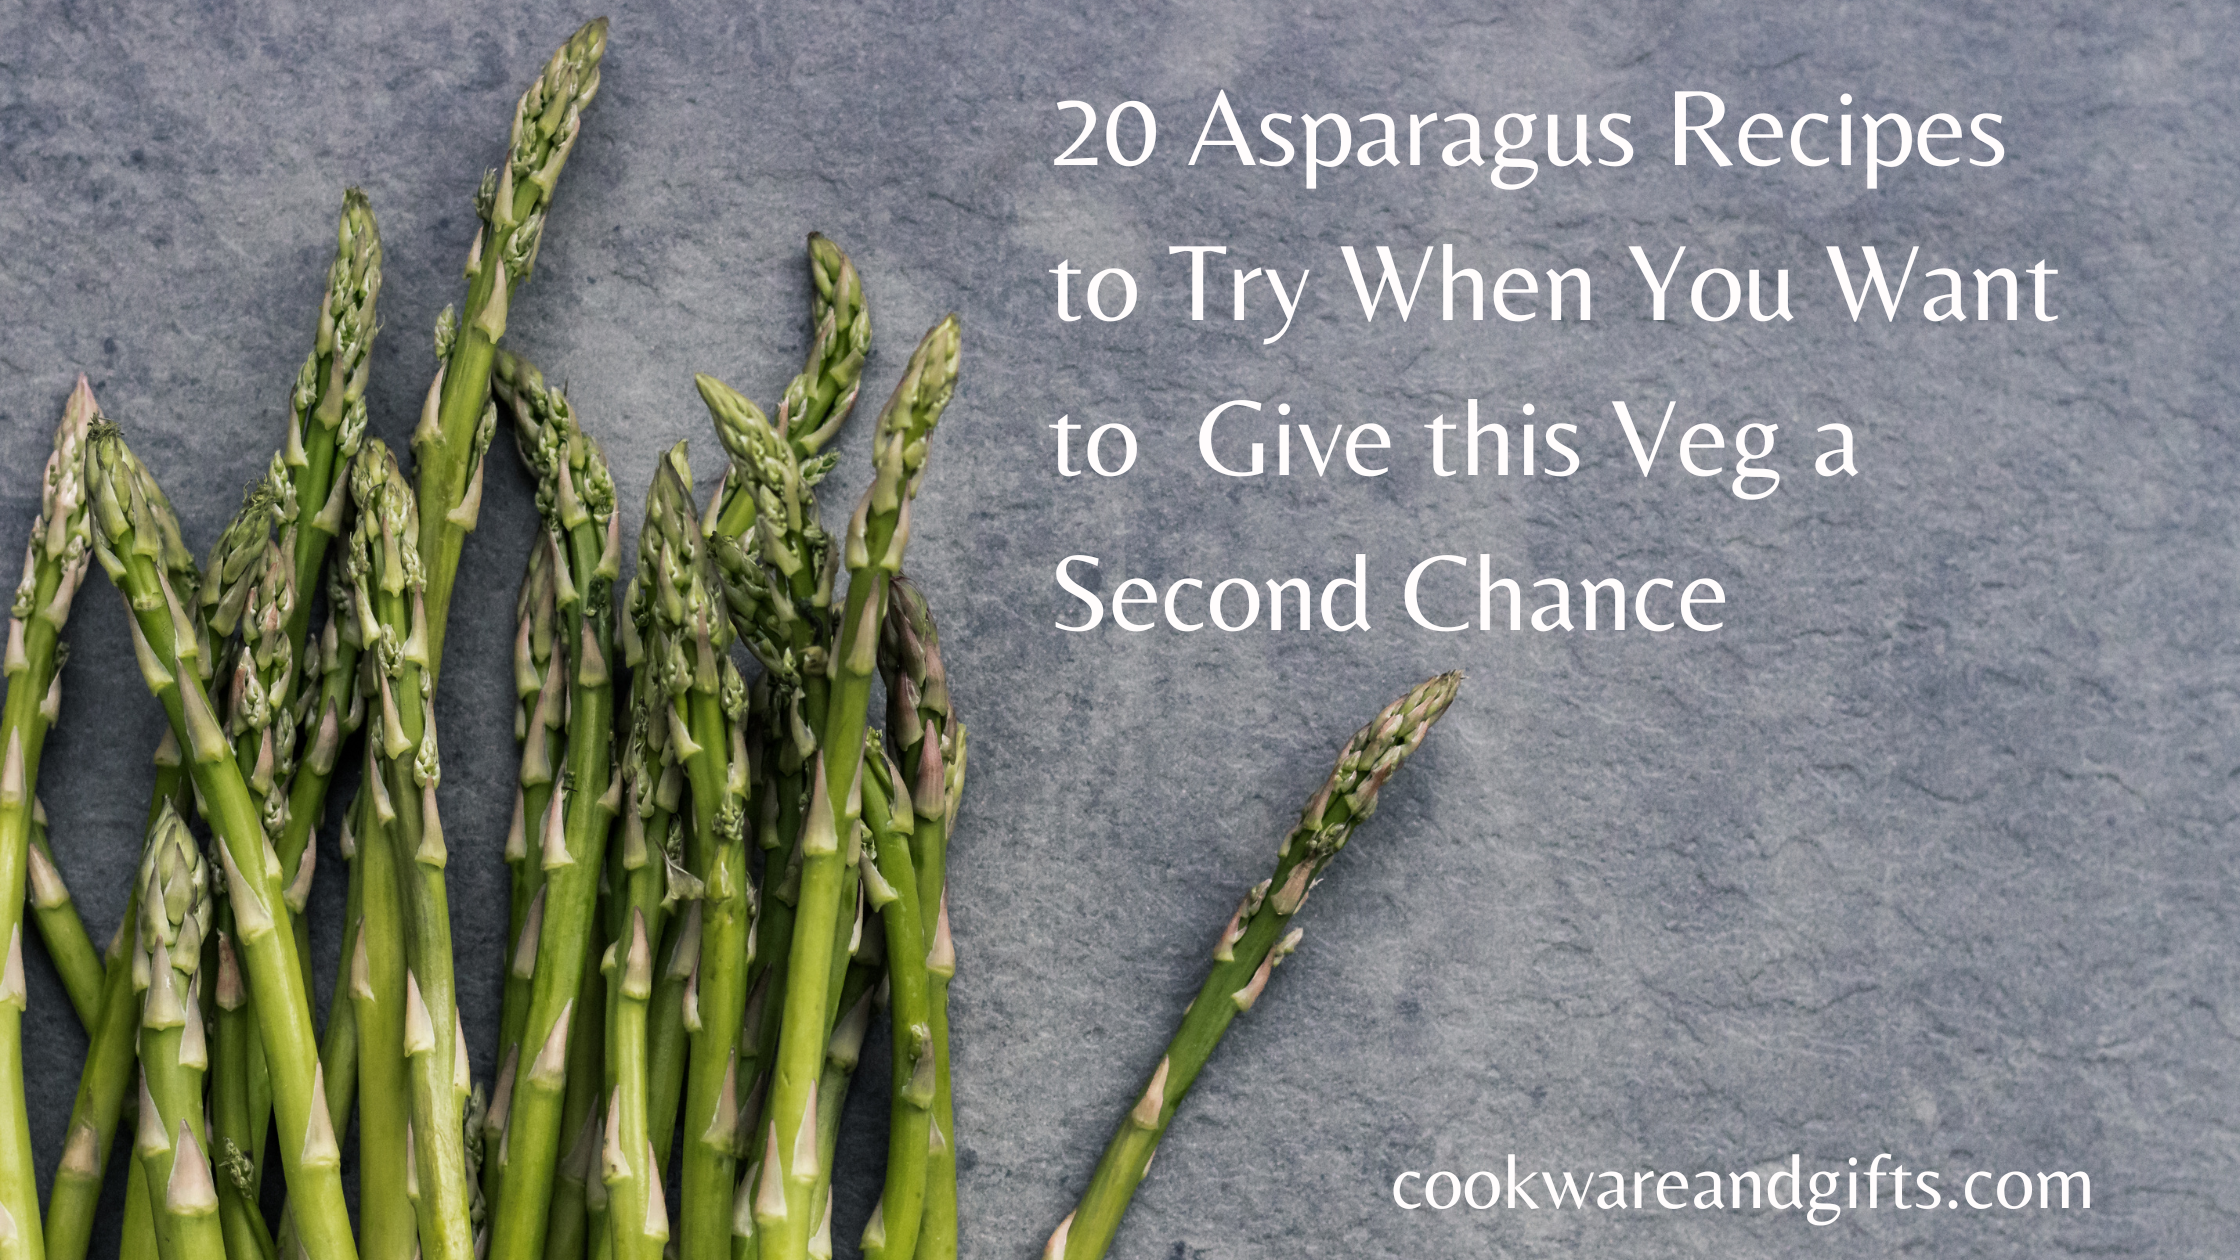 20 Asparagus Recipes to Try When You Want to Give This Veg A Second Chance